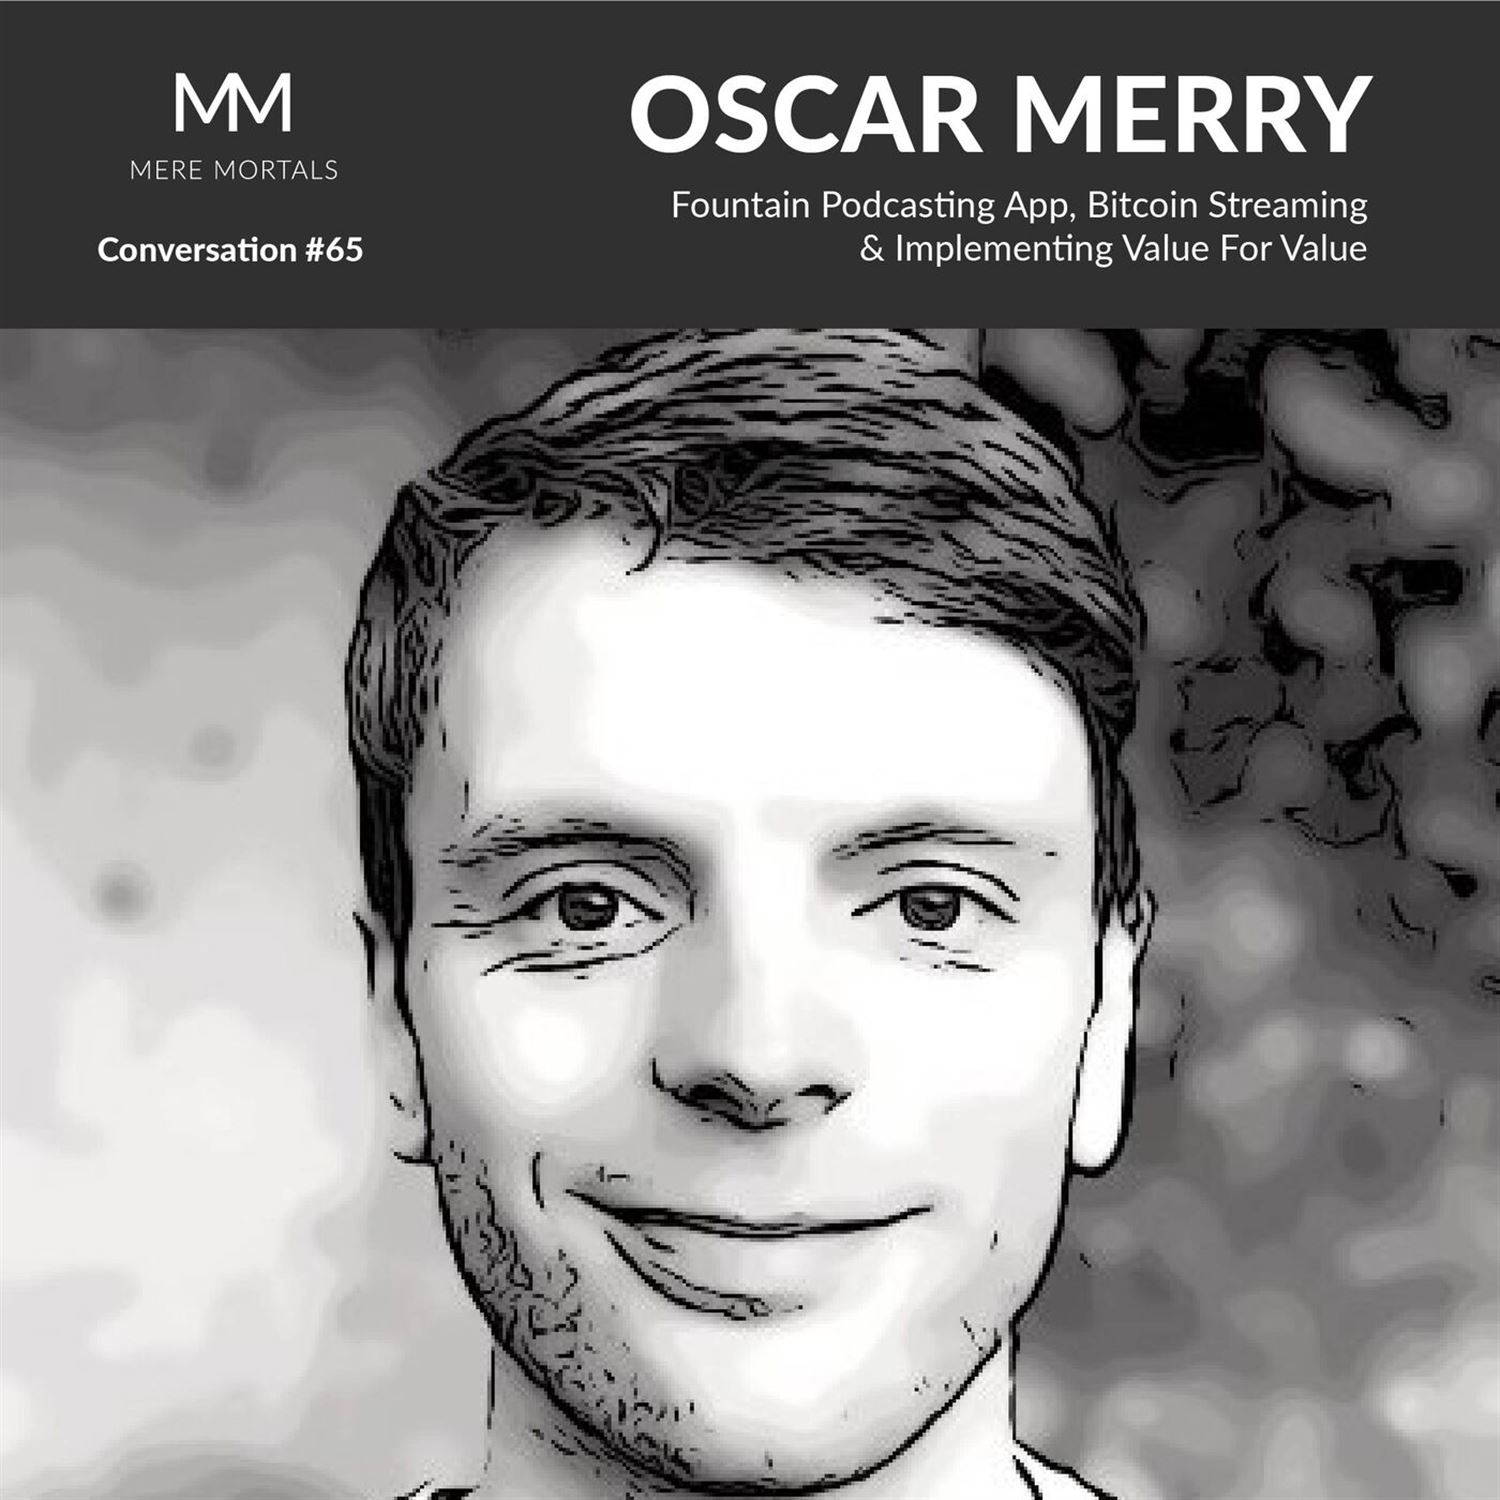 OSCAR MERRY | Fountain Podcasting App, Bitcoin Streaming & Implementing Value For Value